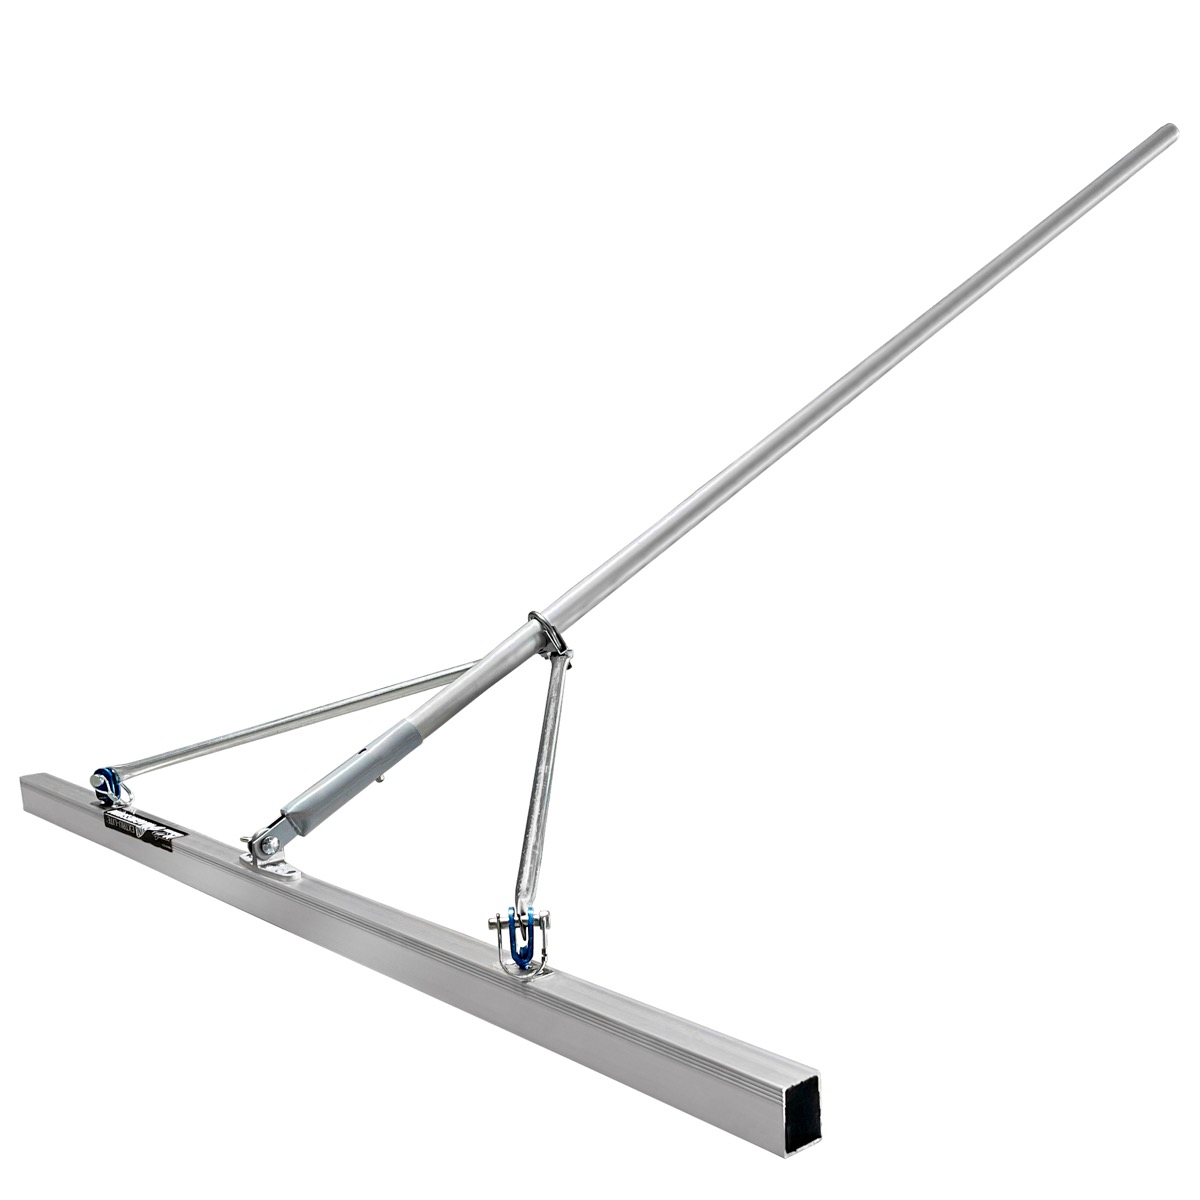 The concrete levelling 5ft Whiskey Stick is available from Speedcrete, United Kingdom. This blade levels and places concrete fast. The twist of a wingnut allows the handle to tilt to the right floating angle.